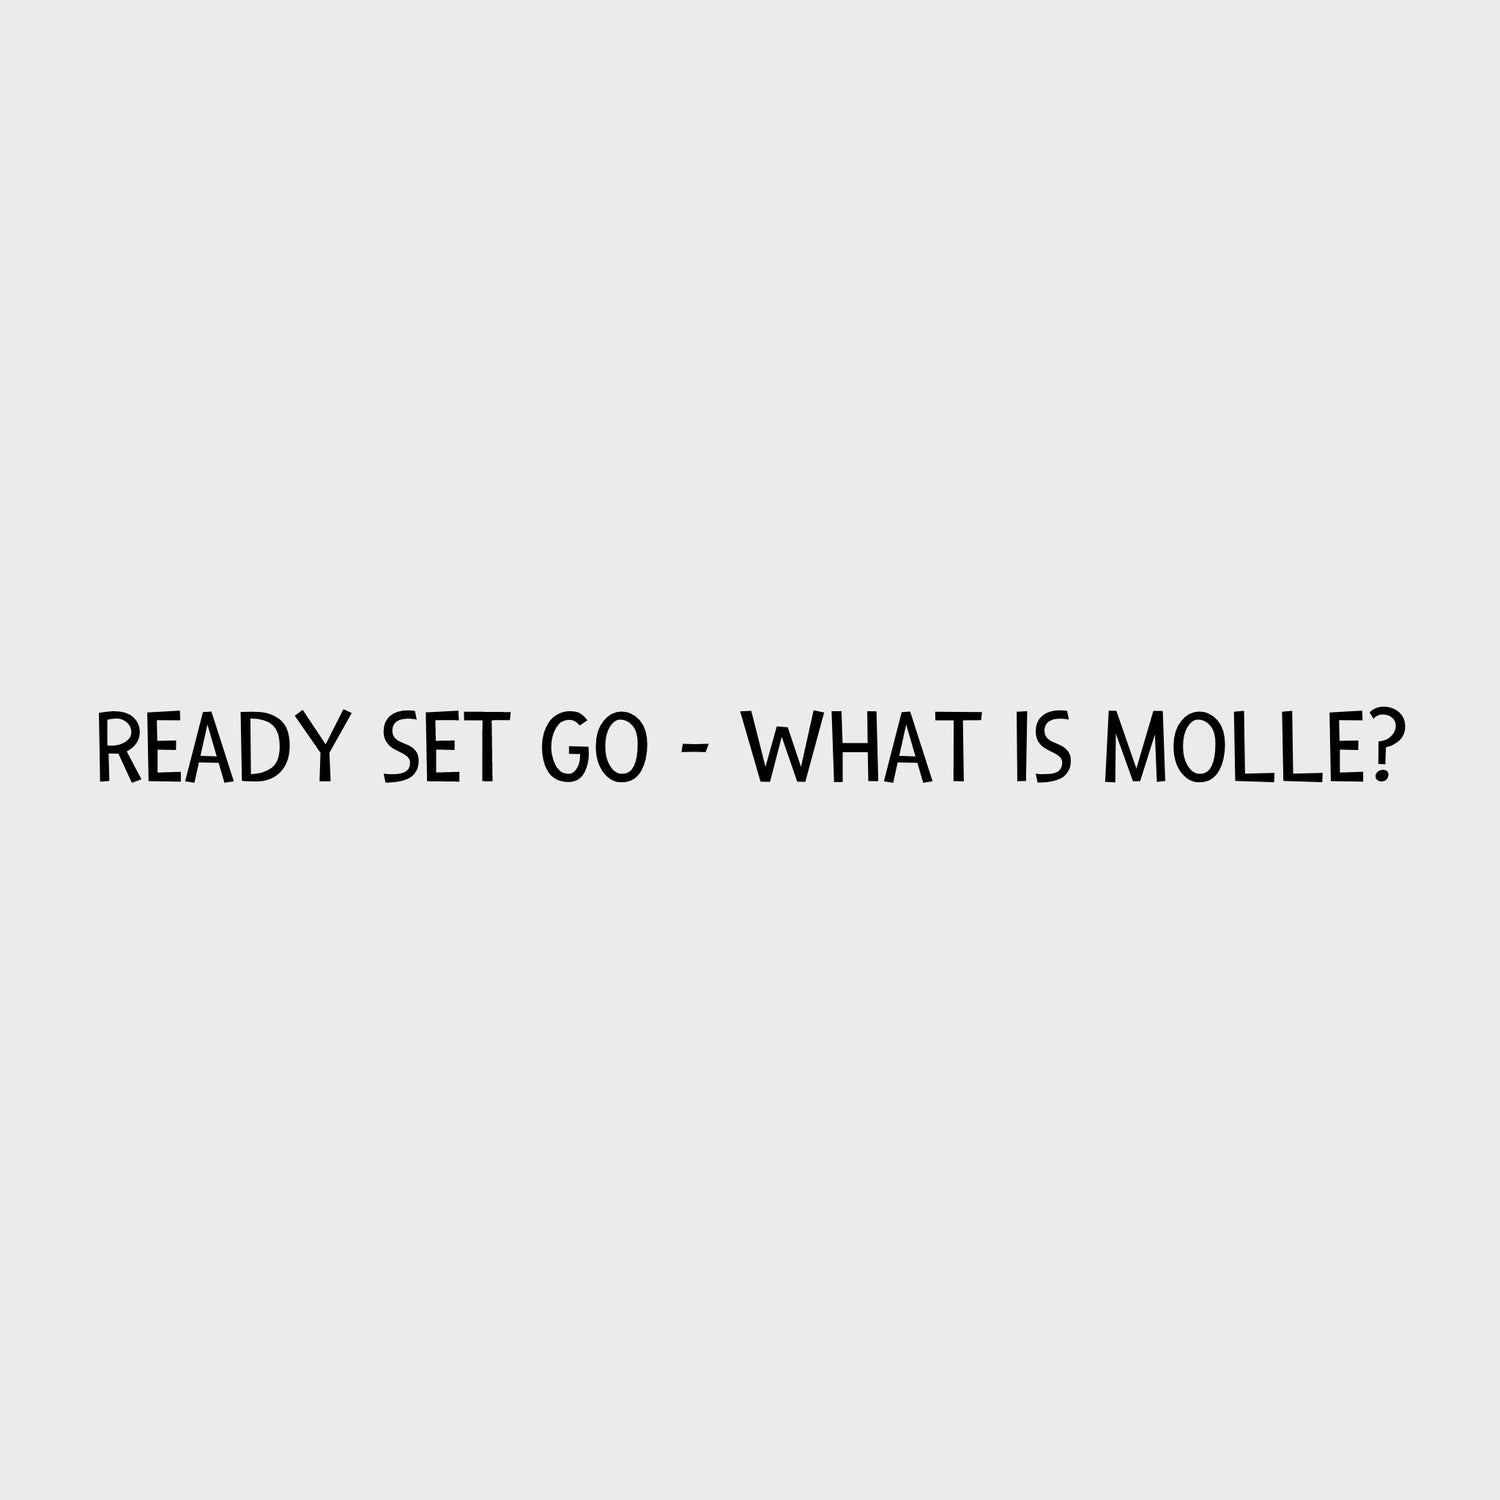 Ready Set Go - What is MOLLE?